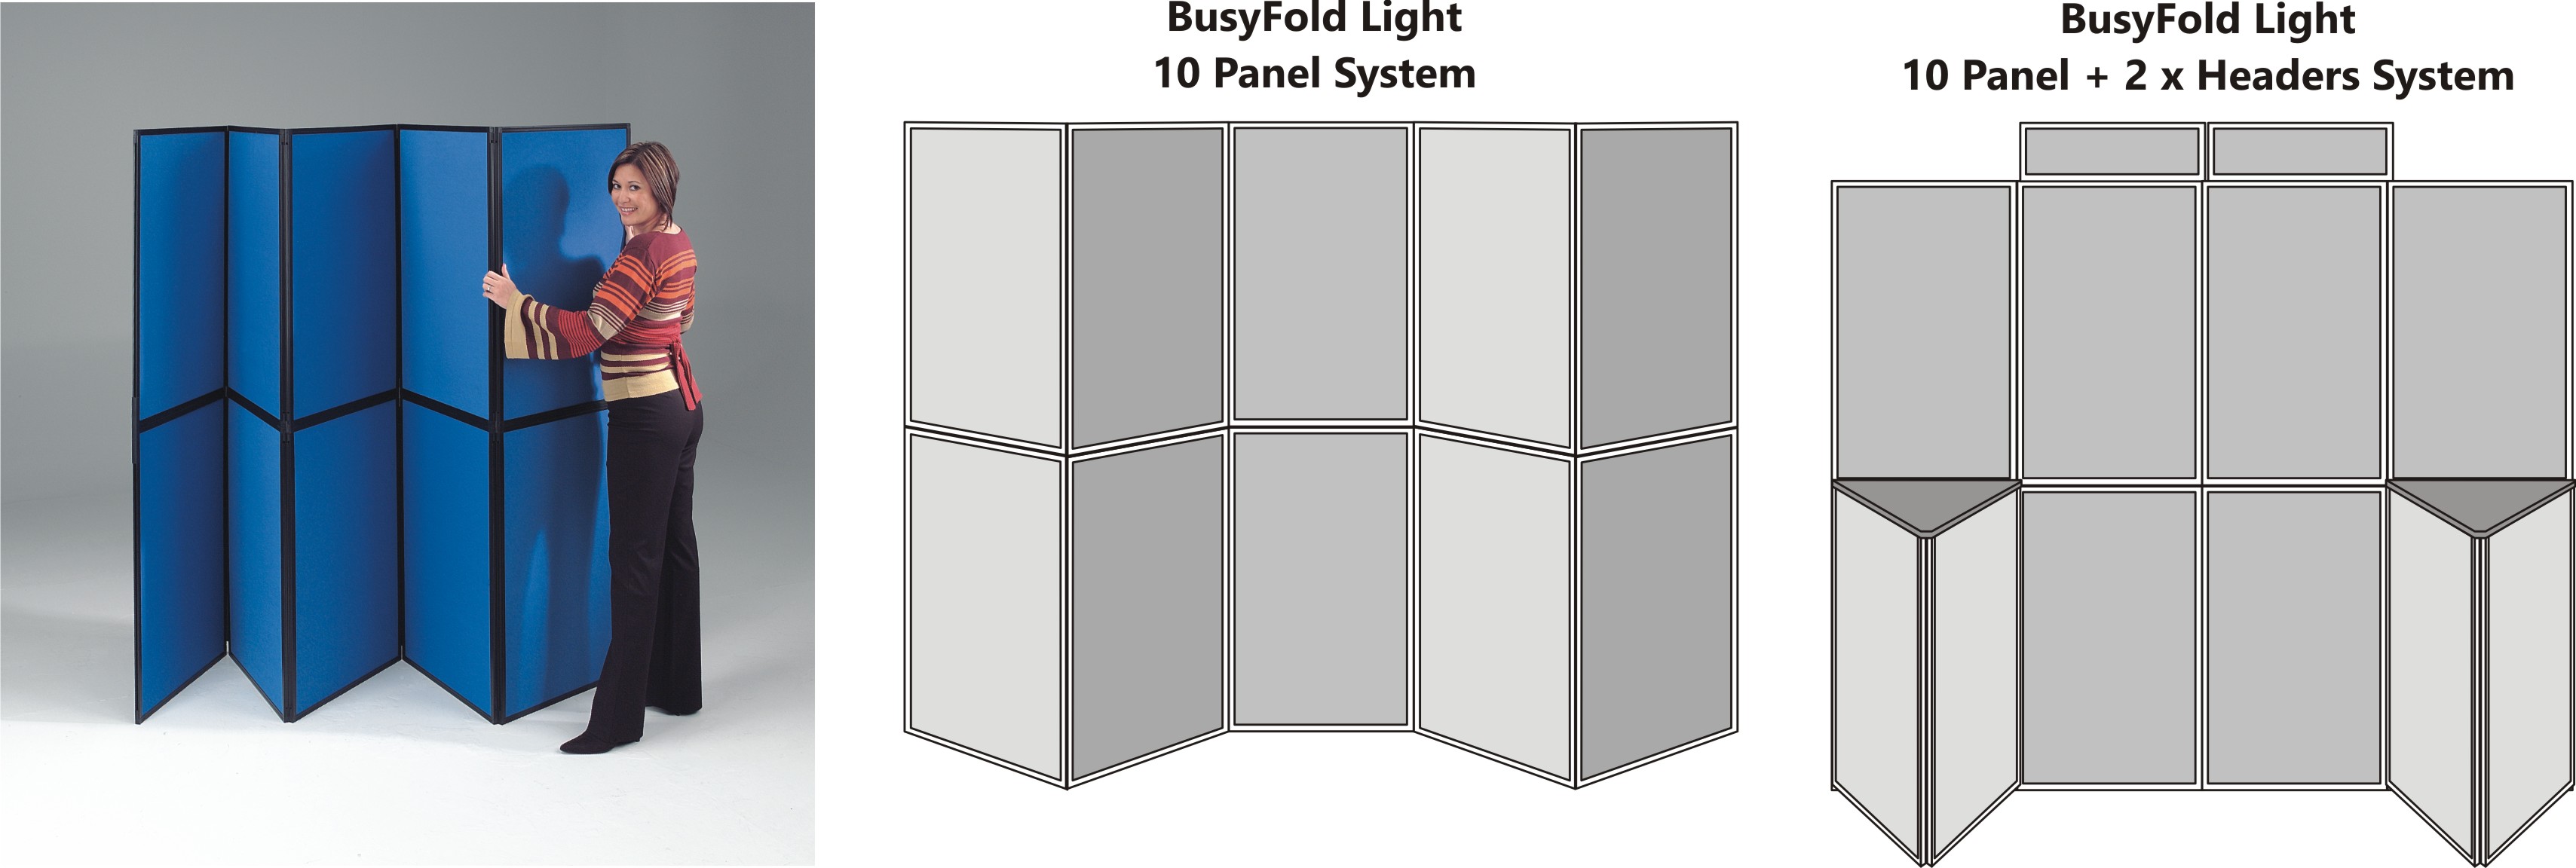 BusyFold Light 10 Panel Display System